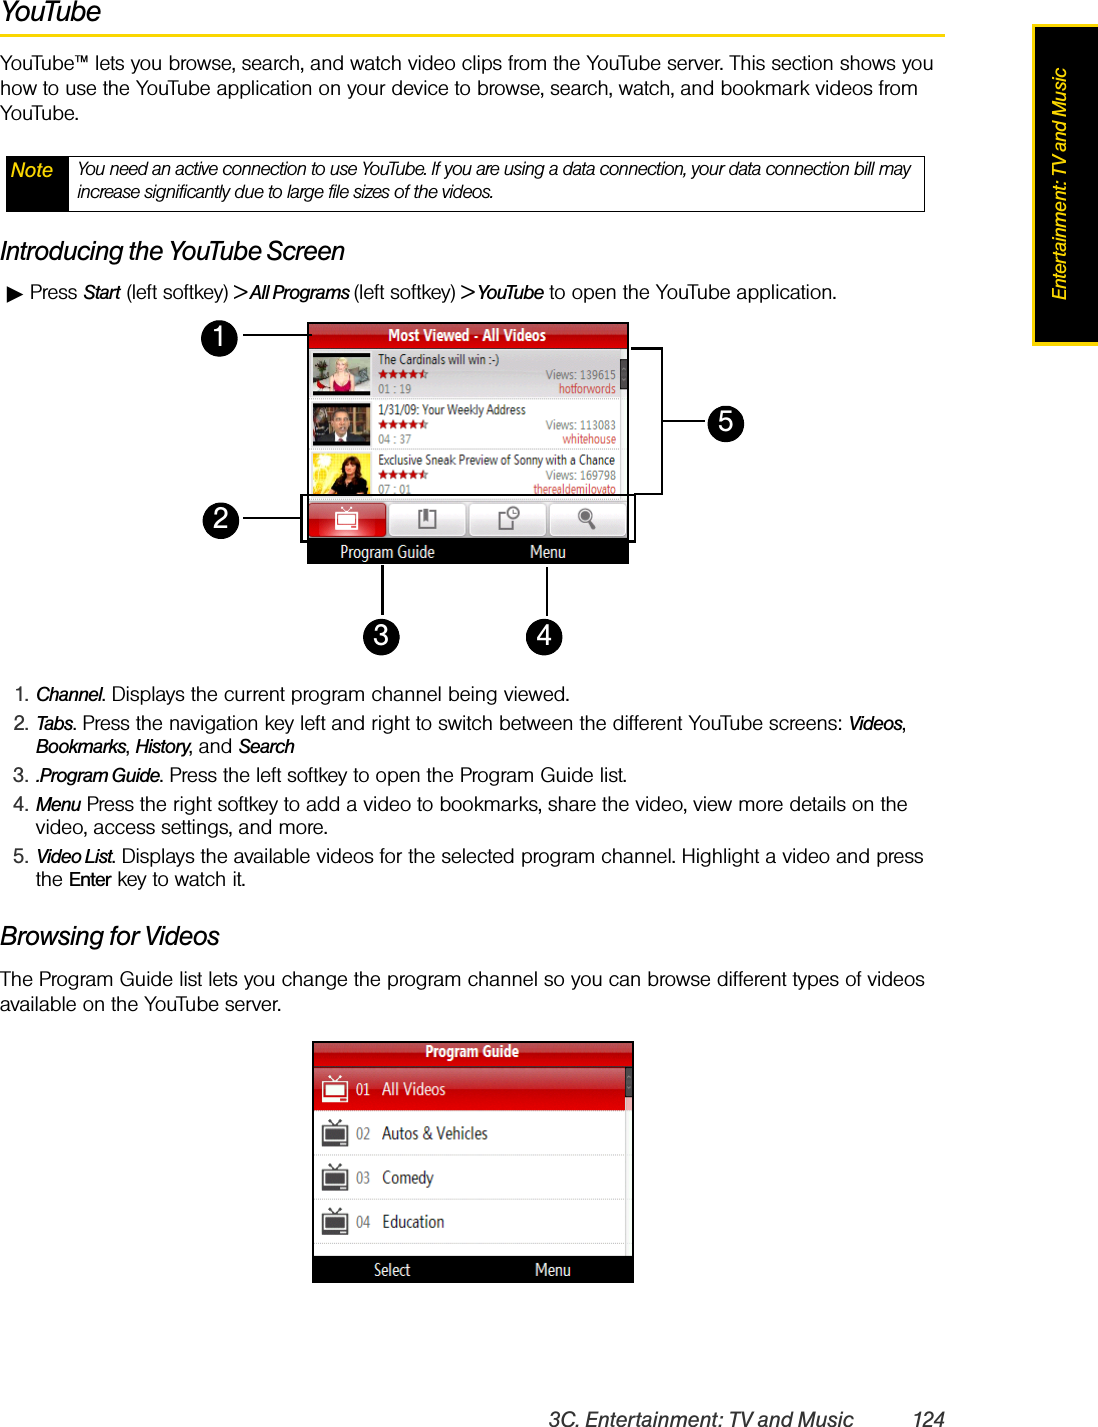 3C. Entertainment: TV and Music 124Entertainment: TV and MusicYouTubeYouTube™ lets you browse, search, and watch video clips from the YouTube server. This section shows you how to use the YouTube application on your device to browse, search, watch, and bookmark videos from YouTube.Introducing the YouTube ScreenᮣPress Start (left softkey) &gt; All Programs (left softkey) &gt; YouTube to open the YouTube application.Browsing for VideosThe Program Guide list lets you change the program channel so you can browse different types of videos available on the YouTube server. Note You need an active connection to use YouTube. If you are using a data connection, your data connection bill may increase significantly due to large file sizes of the videos. 1. Channel. Displays the current program channel being viewed.2. Tabs. Press the navigation key left and right to switch between the different YouTube screens: Videos, Bookmarks, History, and Search3. .Program Guide. Press the left softkey to open the Program Guide list. 4. Menu Press the right softkey to add a video to bookmarks, share the video, view more details on the video, access settings, and more.5. Video List. Displays the available videos for the selected program channel. Highlight a video and press the Enter key to watch it. 23 415